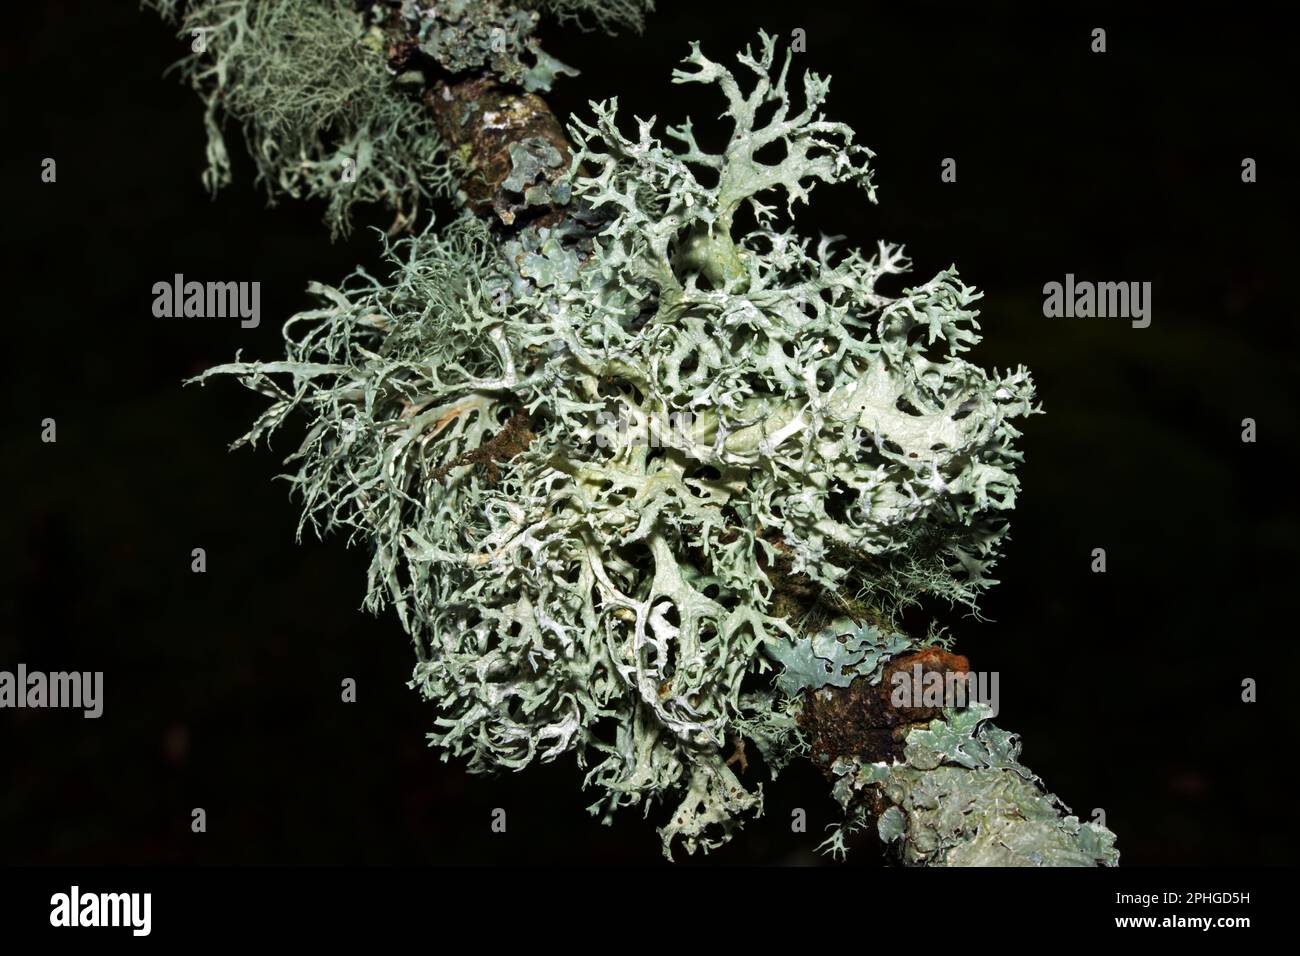 Evernia prunastri (oakmoss) grows primarily on oak trees. It occurs in mountainous temperate forests throughout the Northern Hemisphere. Stock Photo